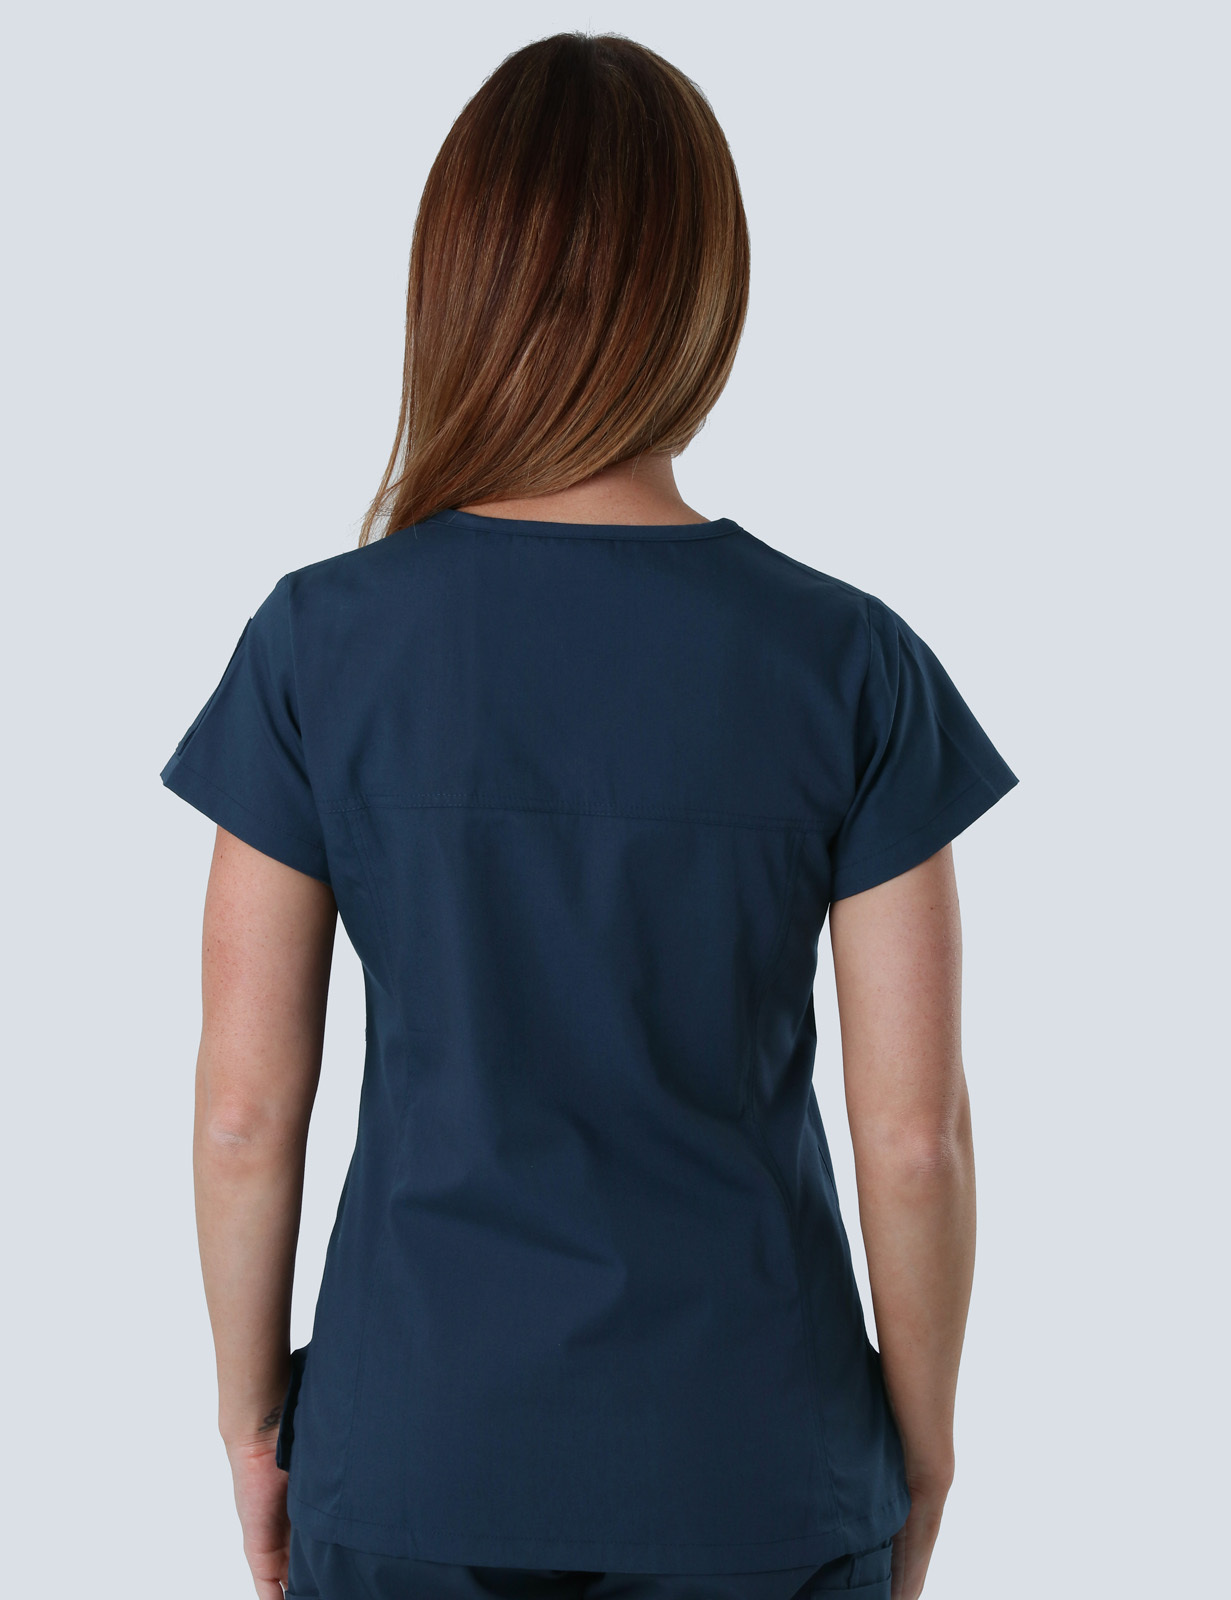 Women's Fit Solid Scrub Top - Navy - 2